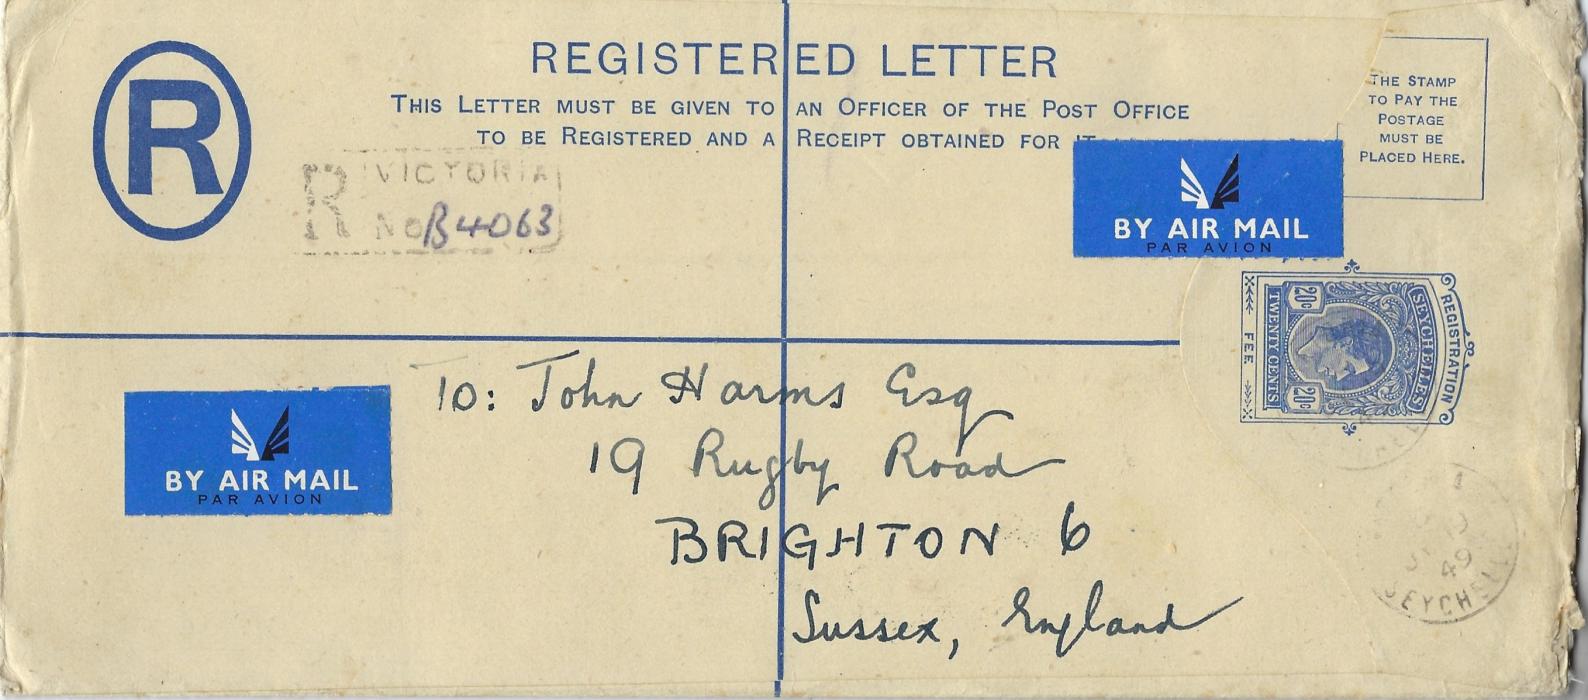 Seychelles 1949 20c KGVI postal stationery registration envelope, size H2, to Brighton lightly cancelled Victoria cds; fine and unfolded airmail usage.